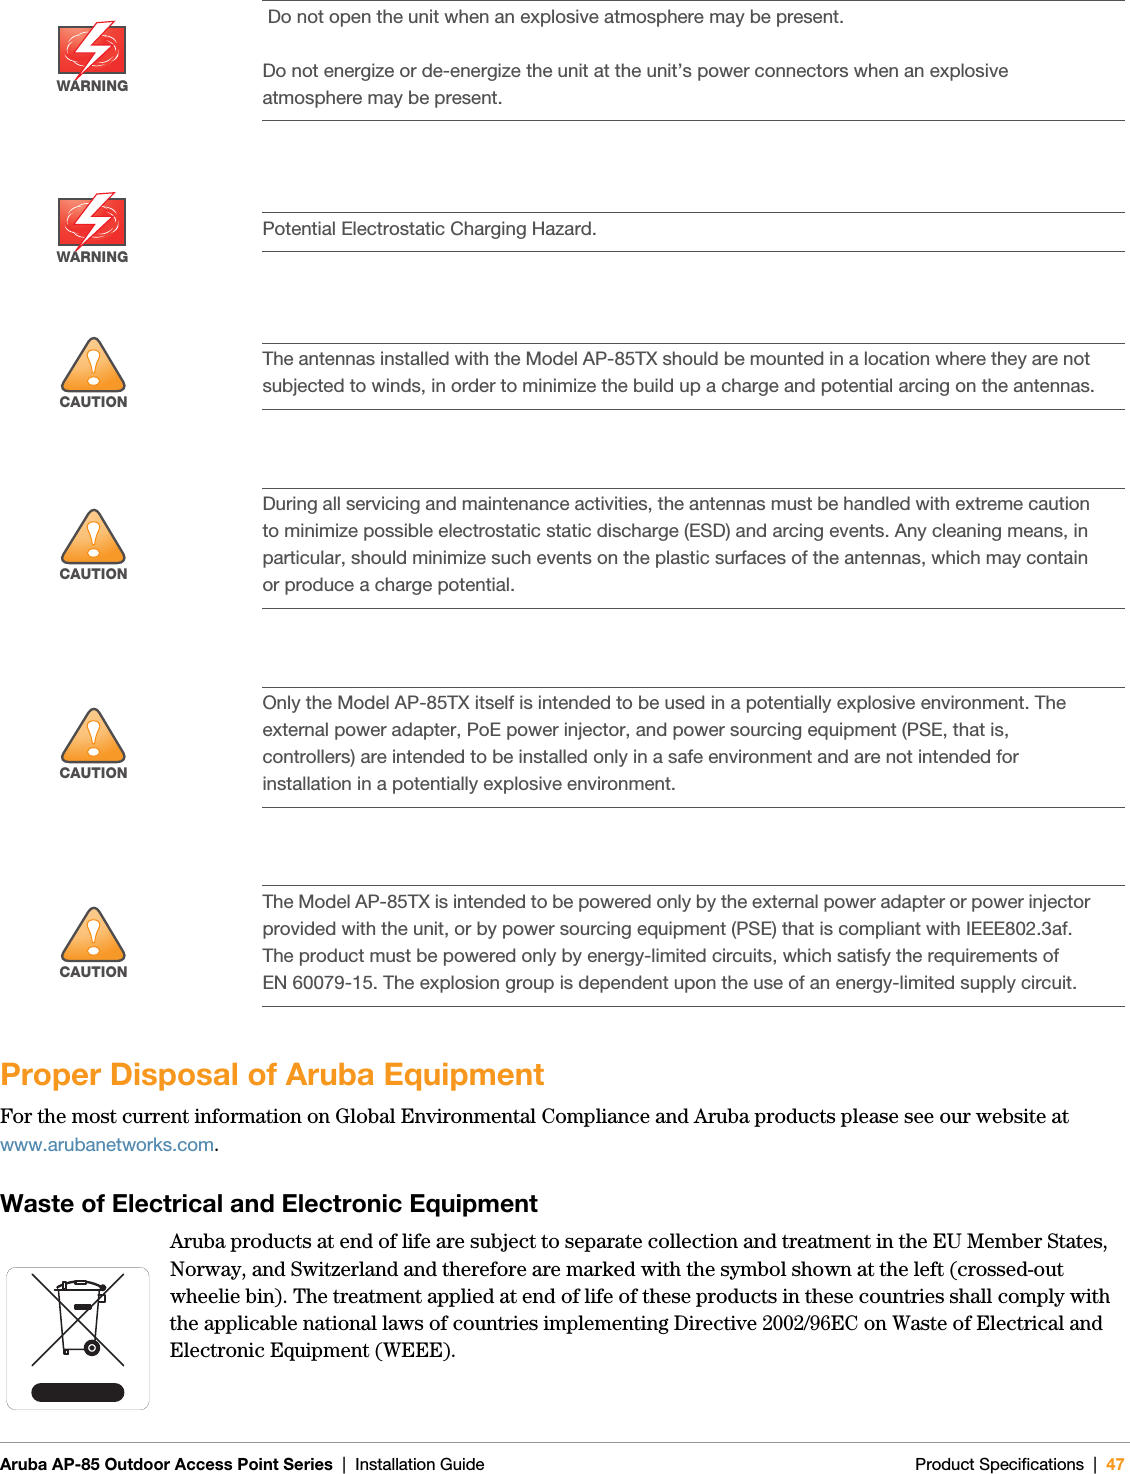 Aruba AP-85 Outdoor Access Point Series | Installation Guide Product Specifications | 47Proper Disposal of Aruba EquipmentFor the most current information on Global Environmental Compliance and Aruba products please see our website at www.arubanetworks.com.Waste of Electrical and Electronic EquipmentAruba products at end of life are subject to separate collection and treatment in the EU Member States, Norway, and Switzerland and therefore are marked with the symbol shown at the left (crossed-out wheelie bin). The treatment applied at end of life of these products in these countries shall comply with the applicable national laws of countries implementing Directive 2002/96EC on Waste of Electrical and Electronic Equipment (WEEE).WARNING Do not open the unit when an explosive atmosphere may be present.Do not energize or de-energize the unit at the unit’s power connectors when an explosive atmosphere may be present.WARNINGPotential Electrostatic Charging Hazard.!CAUTIONThe antennas installed with the Model AP-85TX should be mounted in a location where they are not subjected to winds, in order to minimize the build up a charge and potential arcing on the antennas.!CAUTIONDuring all servicing and maintenance activities, the antennas must be handled with extreme caution to minimize possible electrostatic static discharge (ESD) and arcing events. Any cleaning means, in particular, should minimize such events on the plastic surfaces of the antennas, which may contain or produce a charge potential.!CAUTIONOnly the Model AP-85TX itself is intended to be used in a potentially explosive environment. The external power adapter, PoE power injector, and power sourcing equipment (PSE, that is, controllers) are intended to be installed only in a safe environment and are not intended for installation in a potentially explosive environment.!CAUTIONThe Model AP-85TX is intended to be powered only by the external power adapter or power injector provided with the unit, or by power sourcing equipment (PSE) that is compliant with IEEE802.3af. The product must be powered only by energy-limited circuits, which satisfy the requirements of EN 60079-15. The explosion group is dependent upon the use of an energy-limited supply circuit.